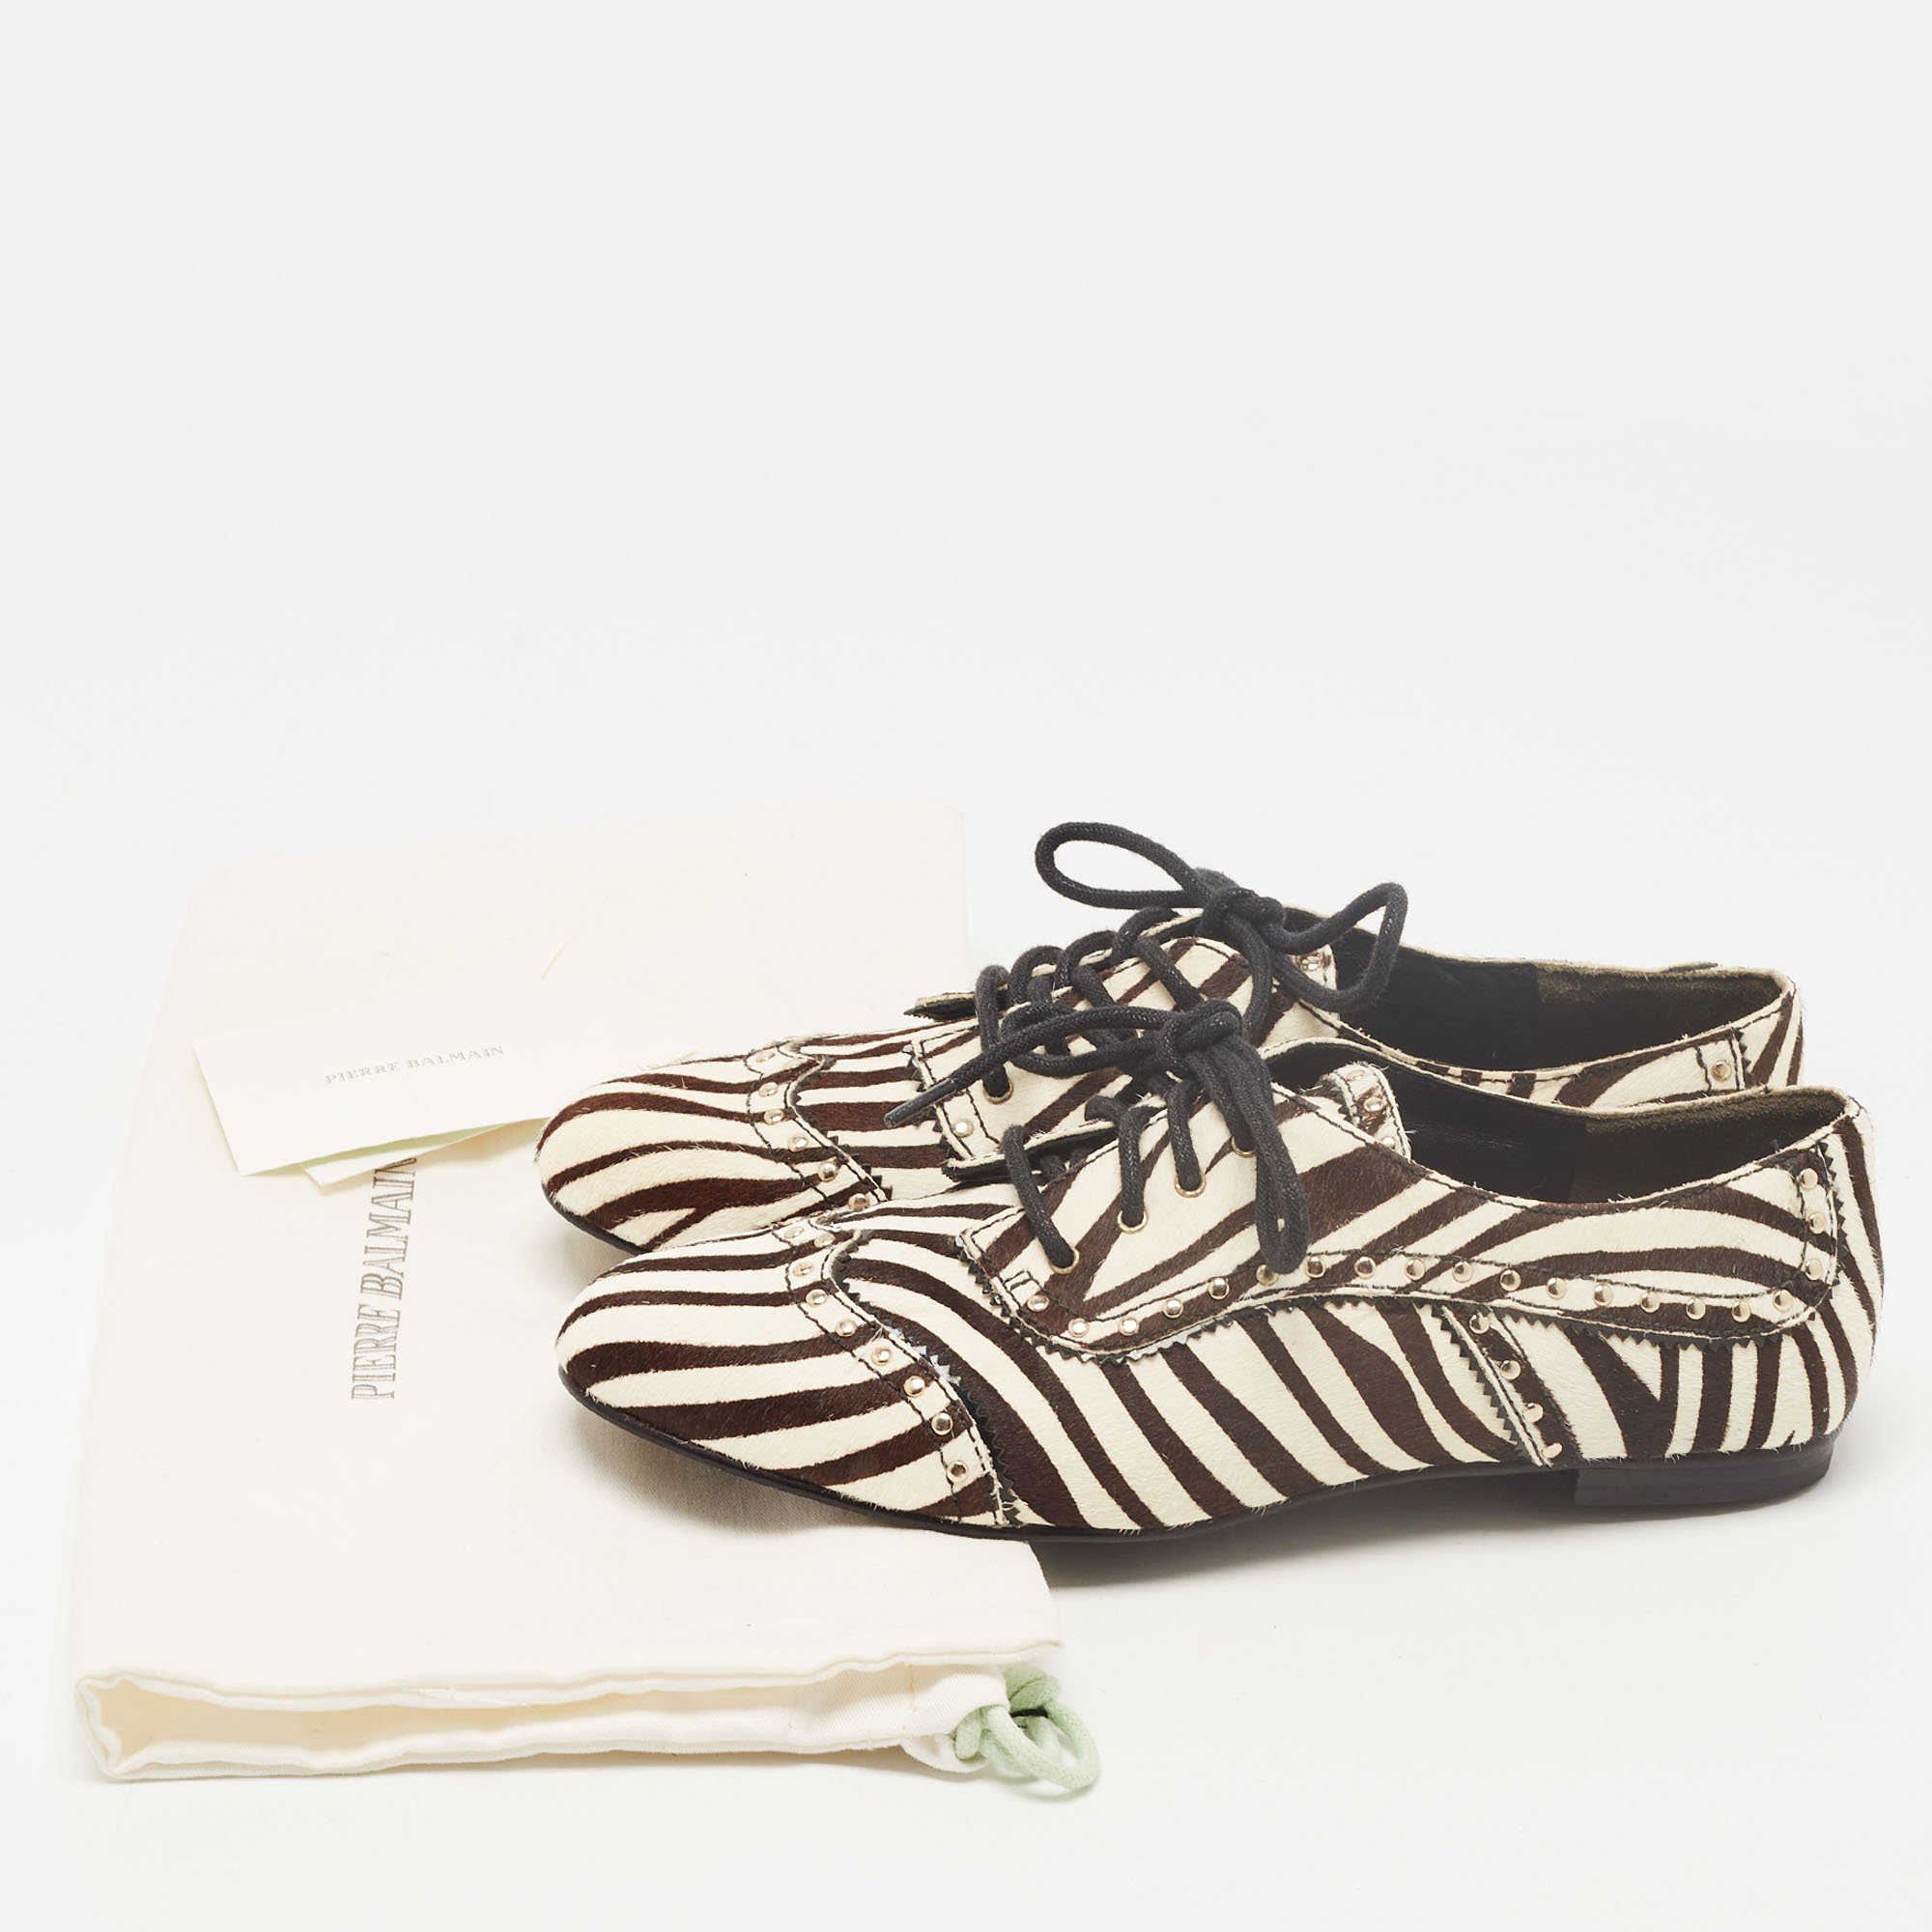 Pierre Balmain Black/ White Zebra Print Pony Hair And Leather Studded  Lace Up Oxfords Size 37